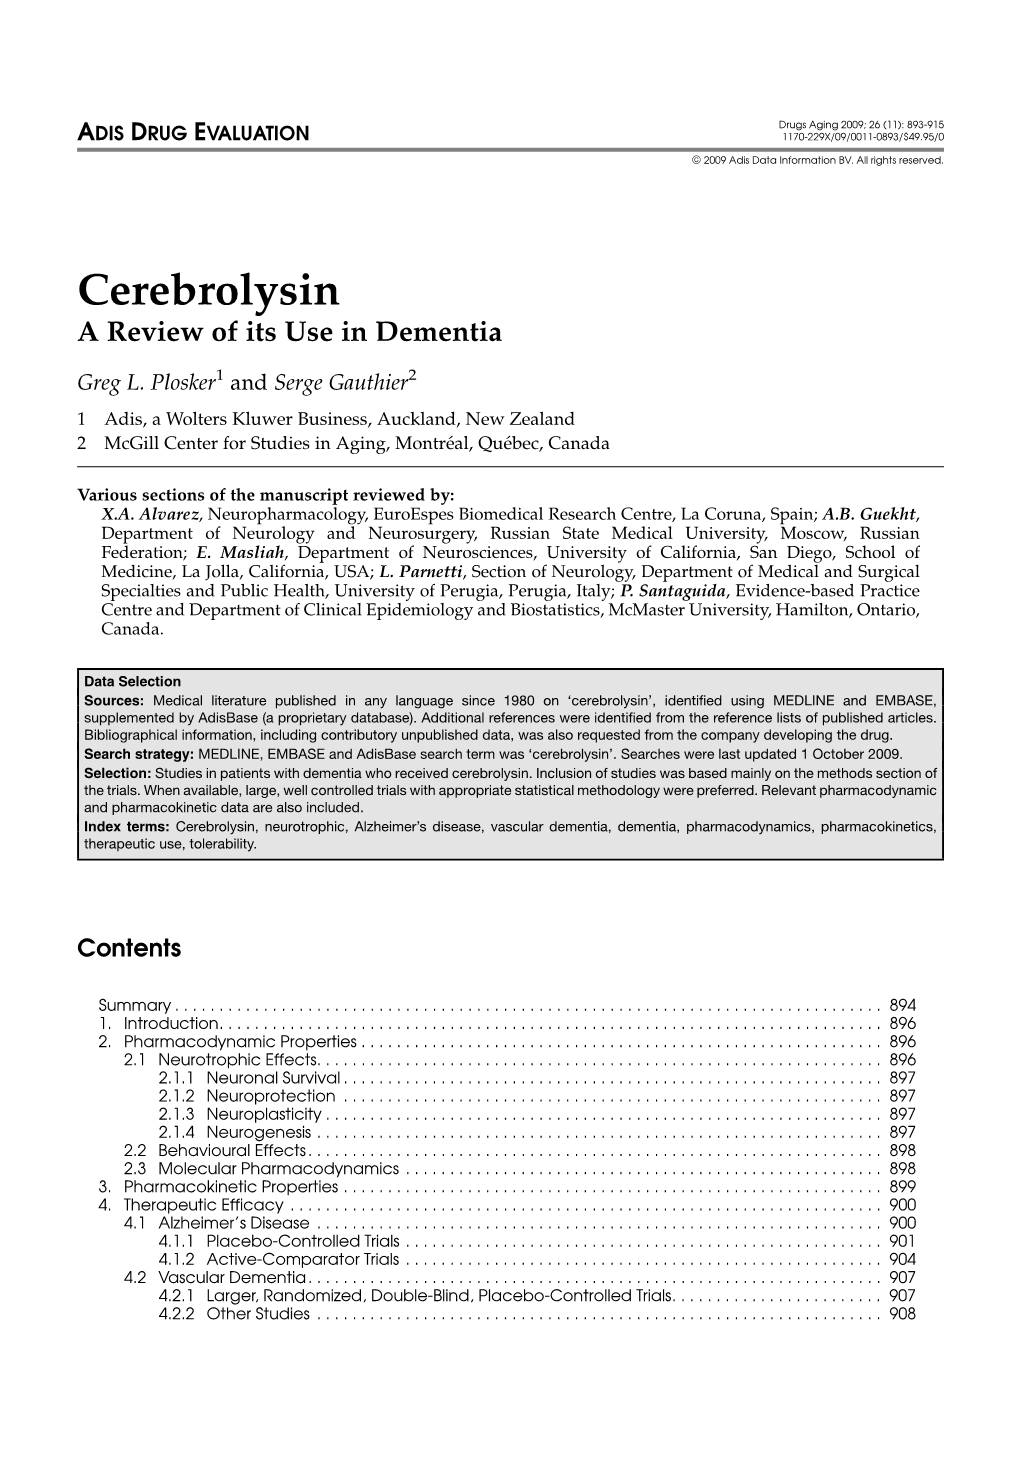 Cerebrolysin a Review of Its Use in Dementia